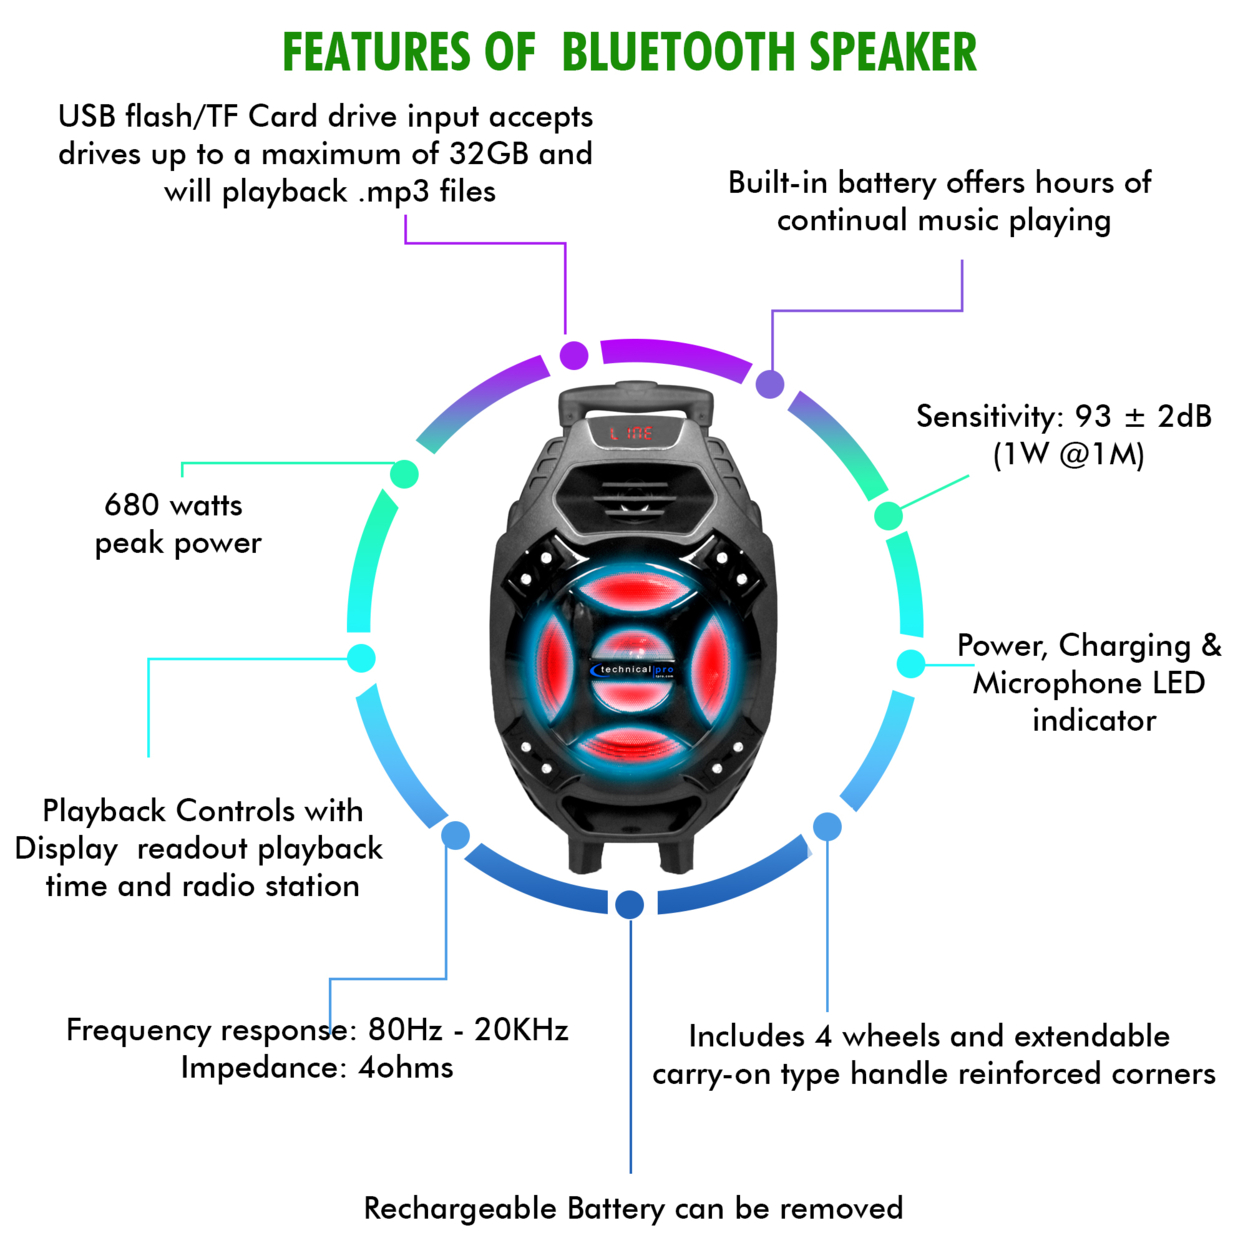 Technical Pro 600 Watts Rechargeable Bluetooth Speakers With Built-in Battery USB, SD Card, 1 Microphone, AUX Input, Wheels